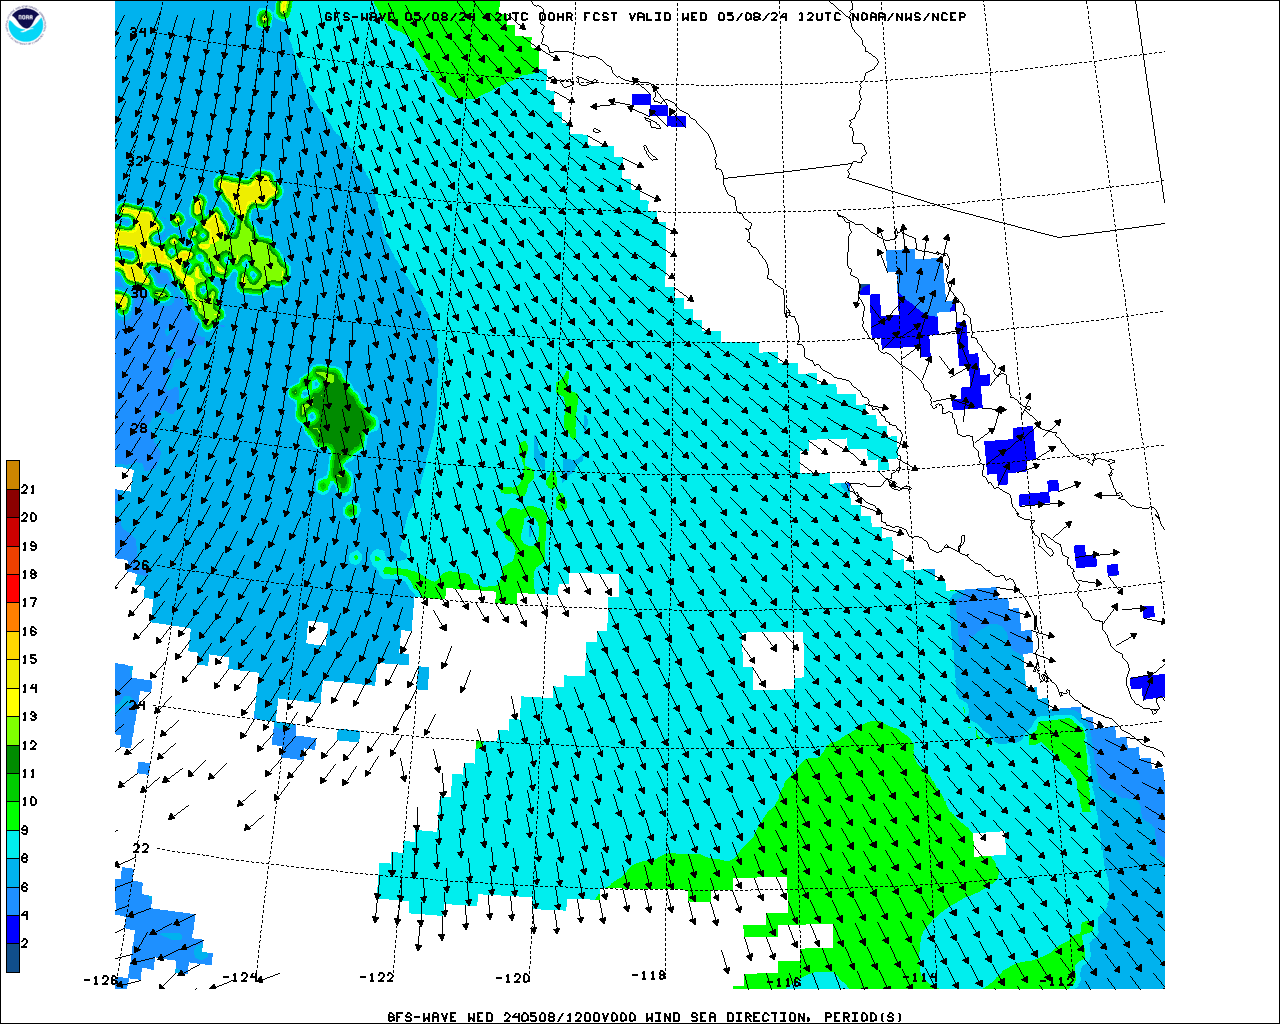 California Wind Speed and Direction Forecast